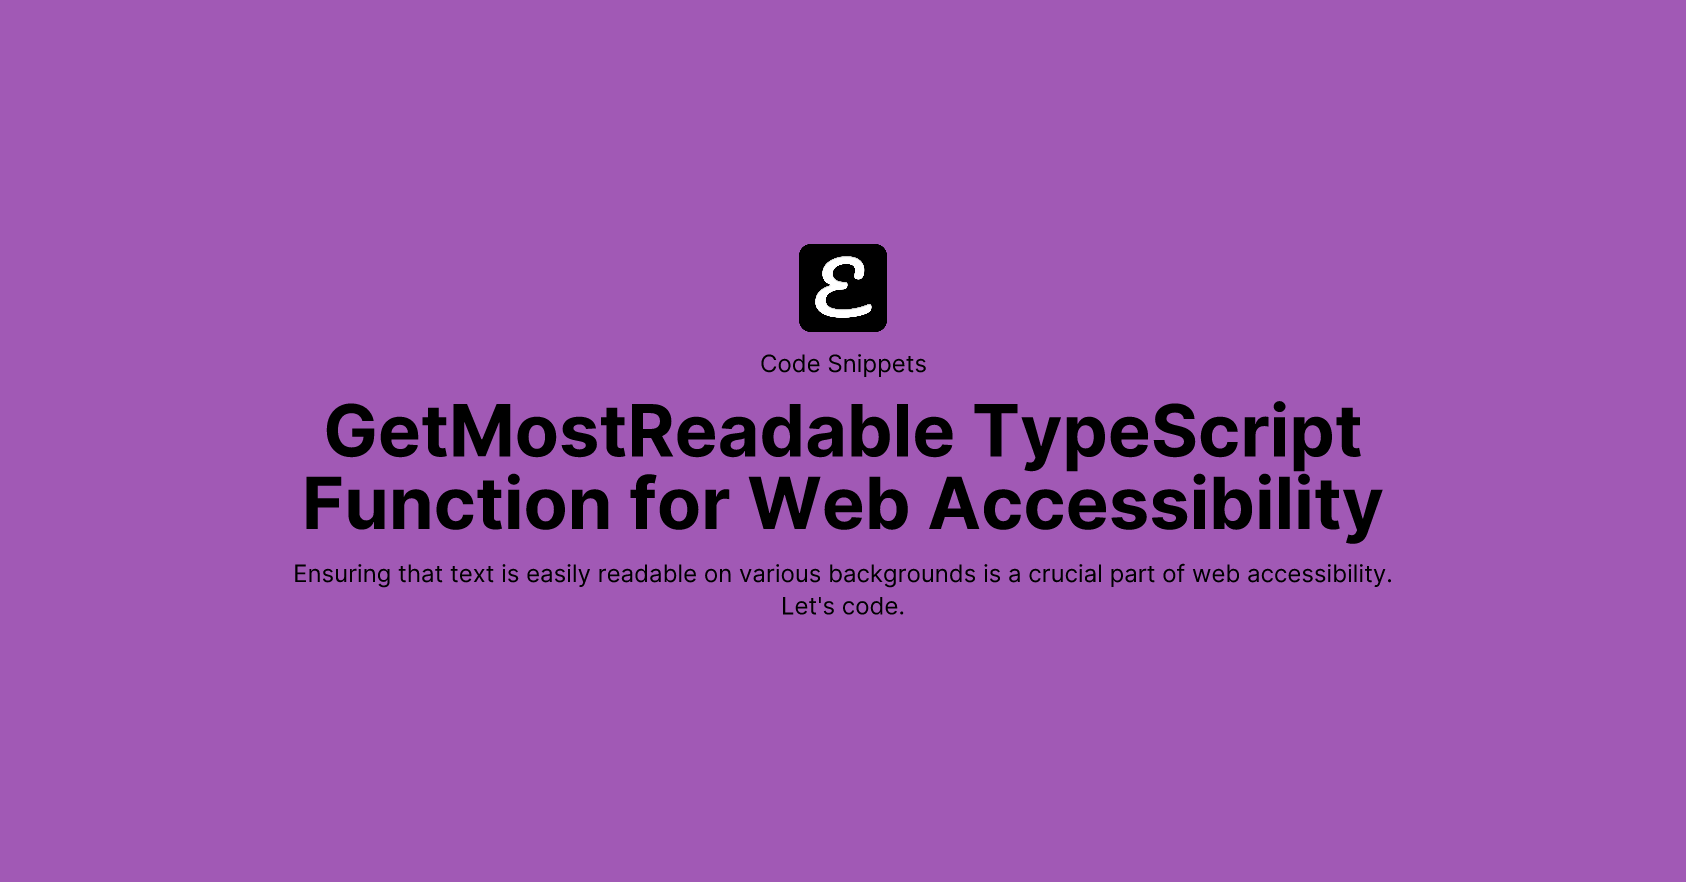 GetMostReadable TypeScript Function for Web Accessibility by Eric David Smith